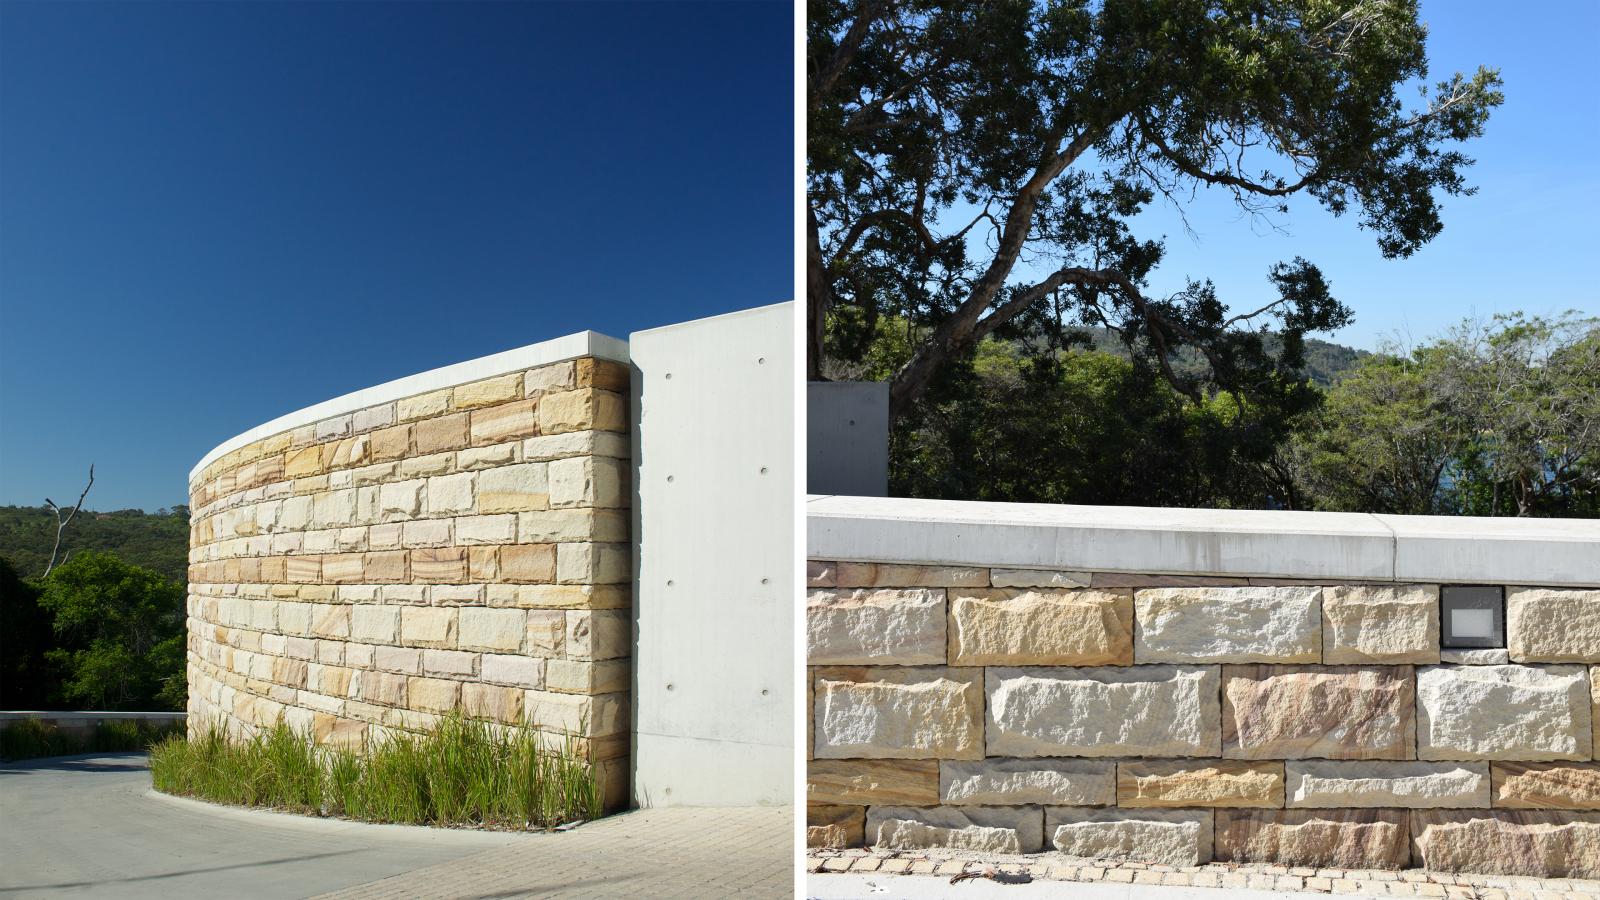 A divided image showing two different stone walls. The left side features a curved wall made of stacked irregular stone blocks under a clear blue sky, reminiscent of Spring Cove's charm. The right side shows a straight stone wall with similar blocks, adjacent to a tree and greenery in the background, much like you’d find around Manly.